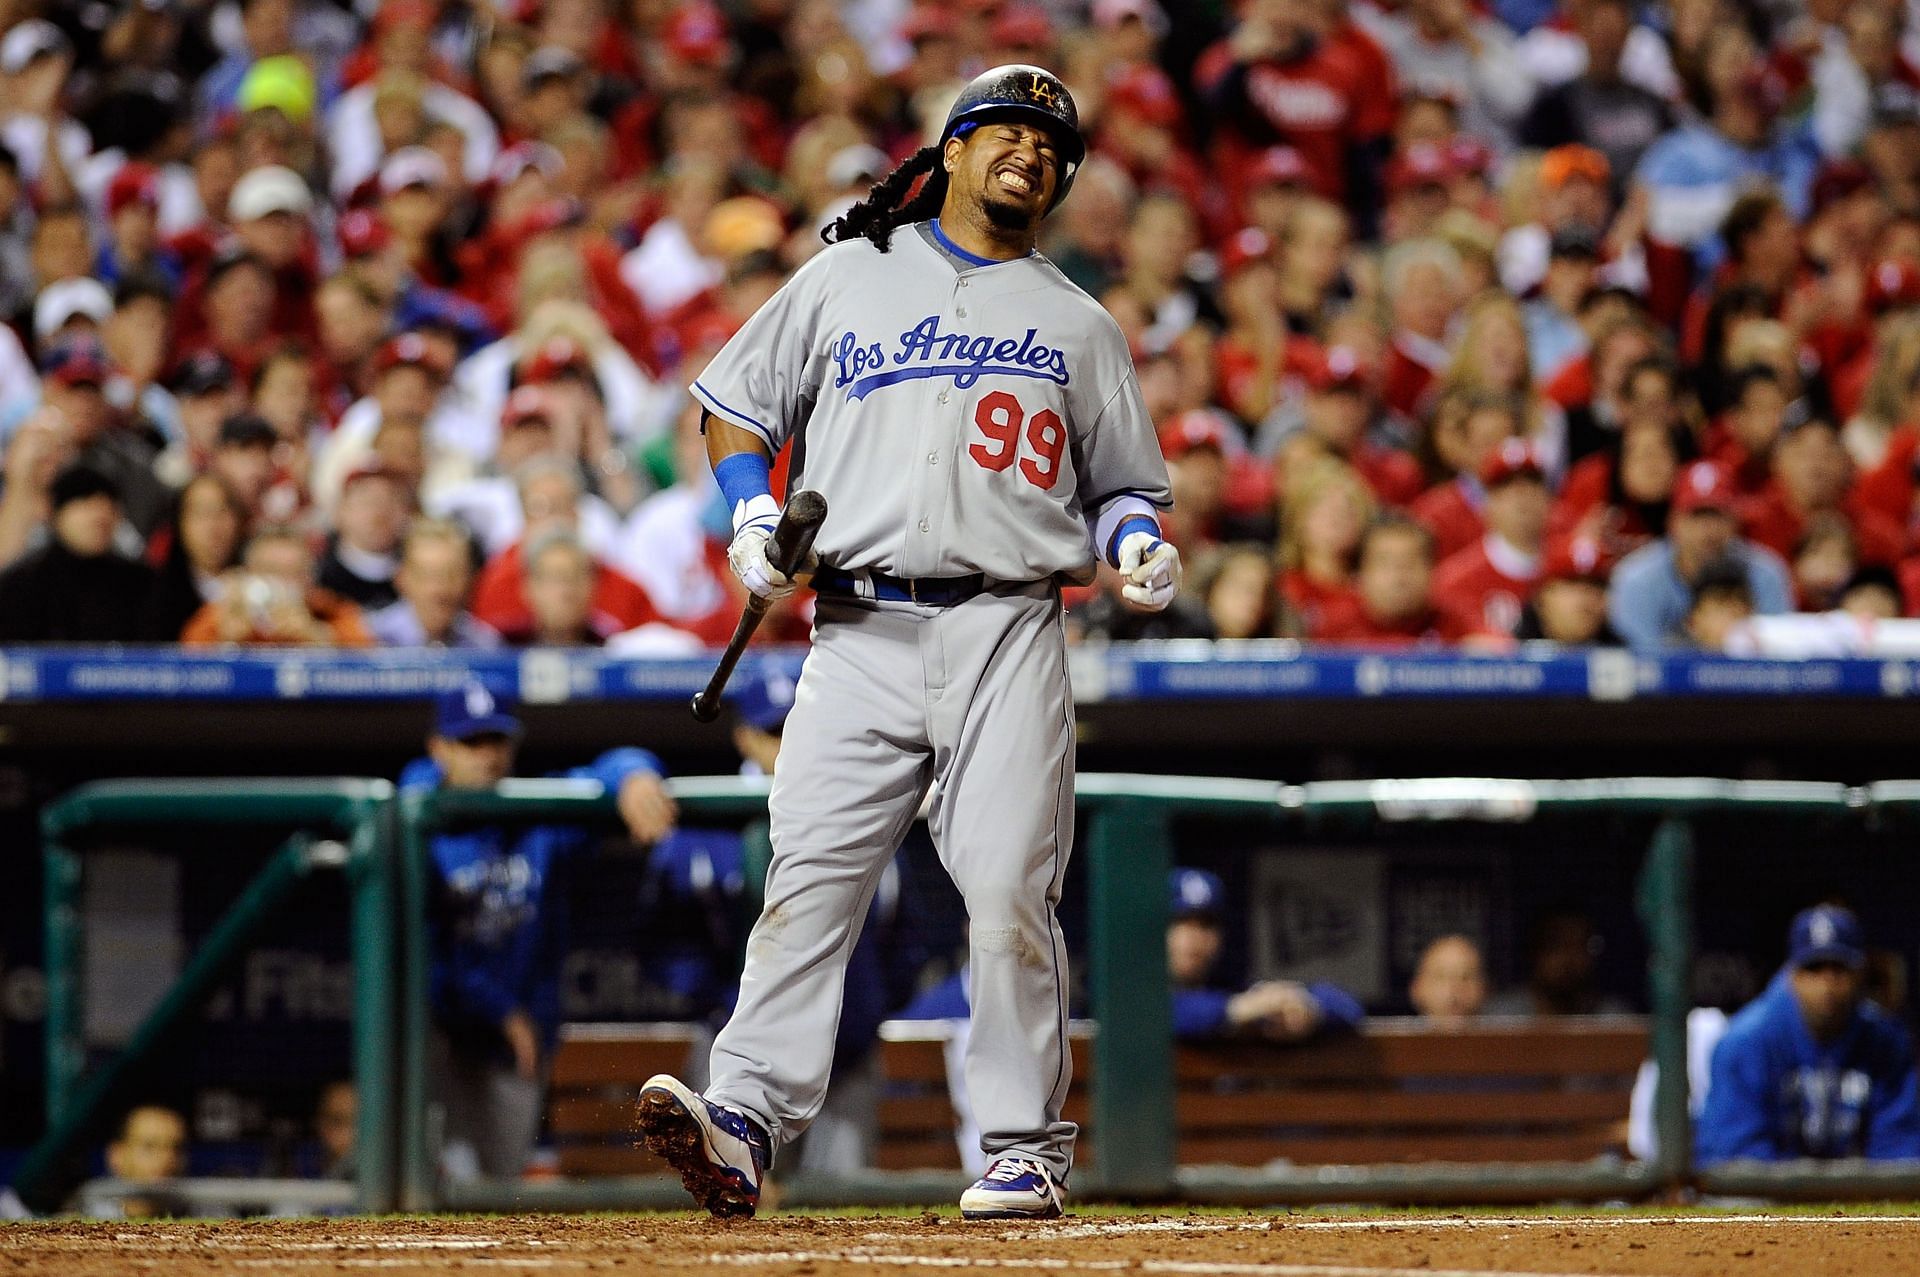 Manny Ramirez's Hall of Fame case remains controversial - Sports